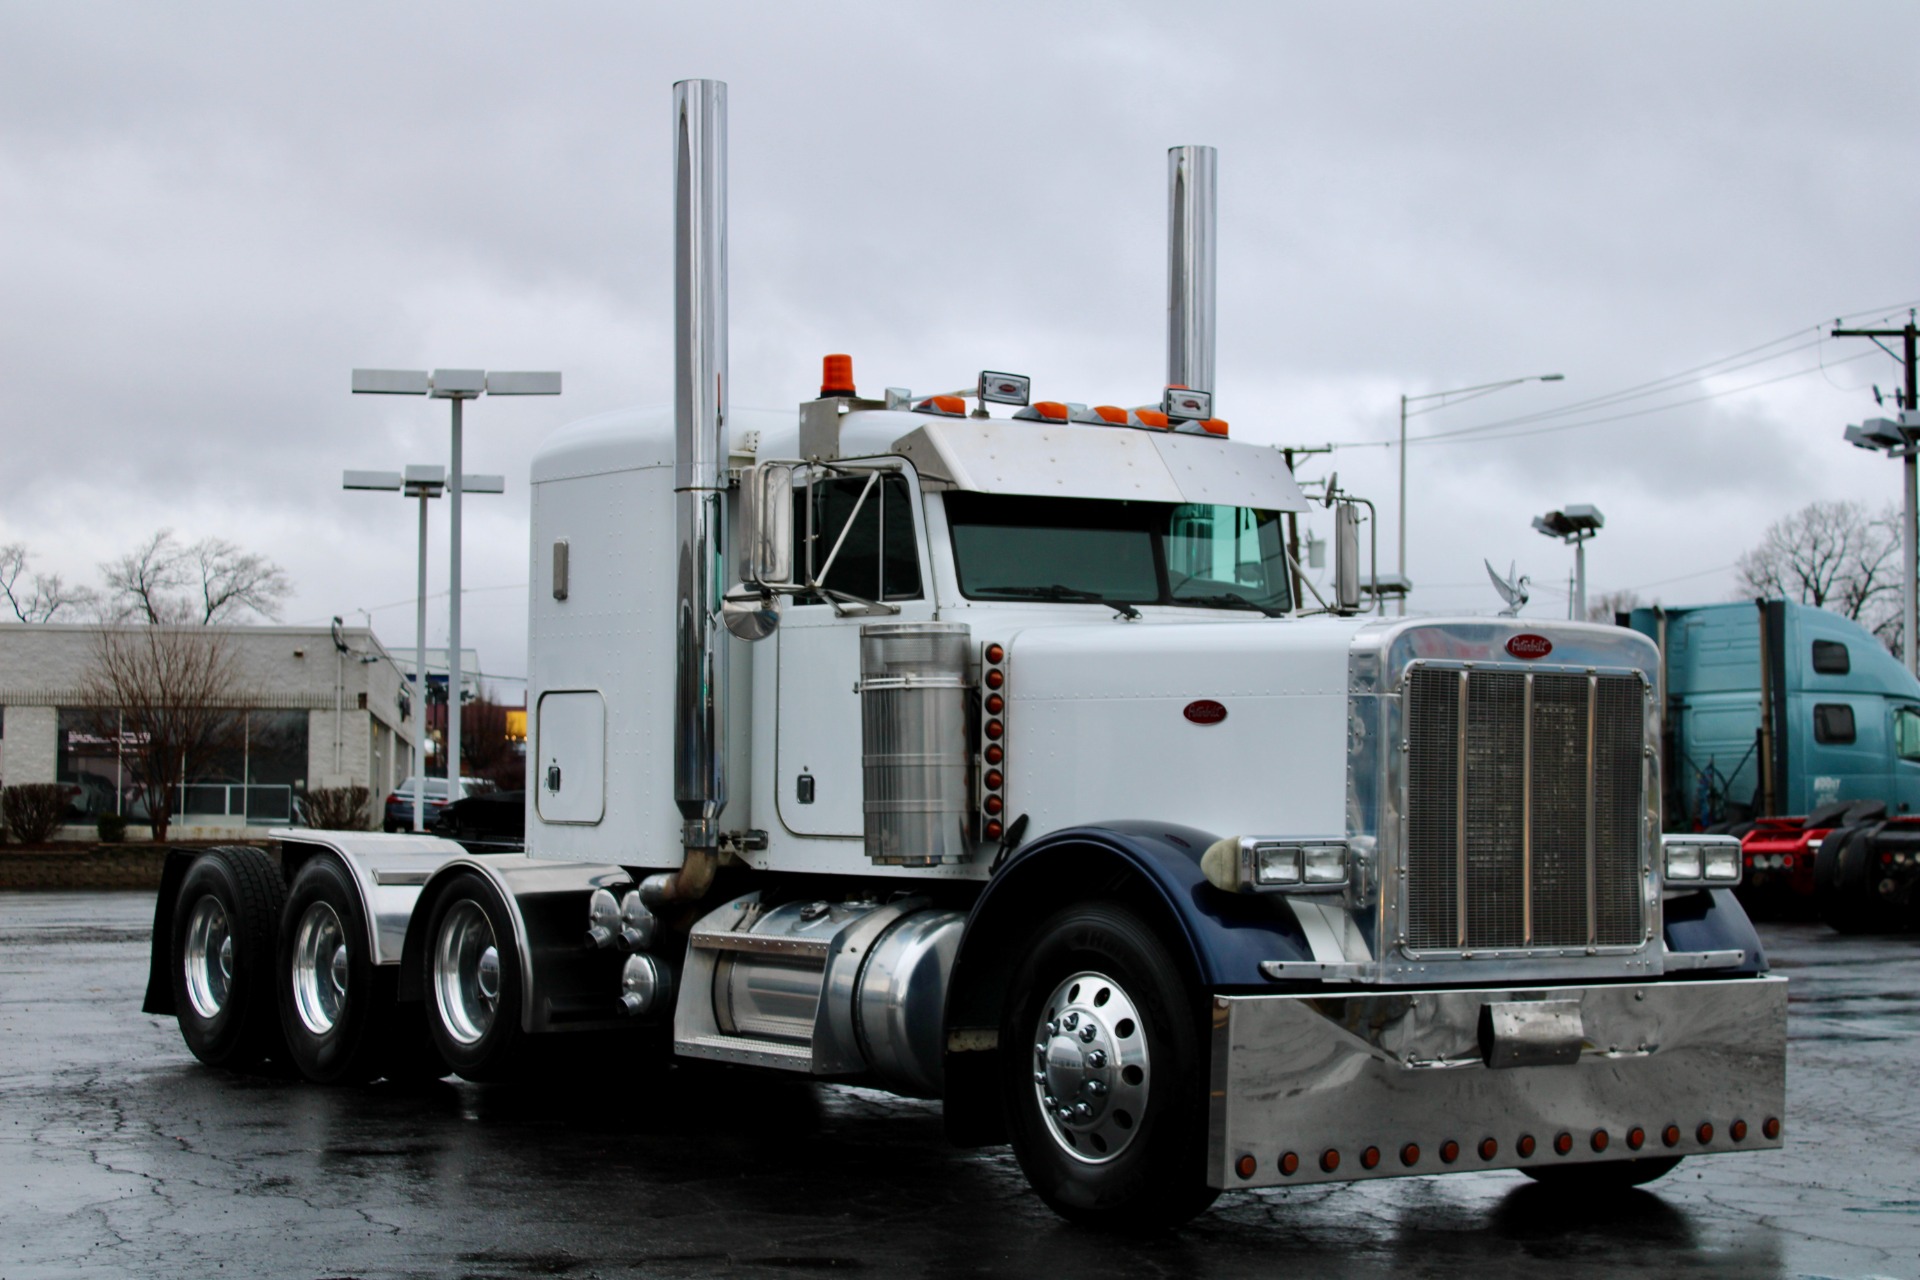 Used-2002-Peterbilt-379-Tri-Axle-with-Lift-CAT-C15-6NZ-550-HP-Double-Wet-Kit